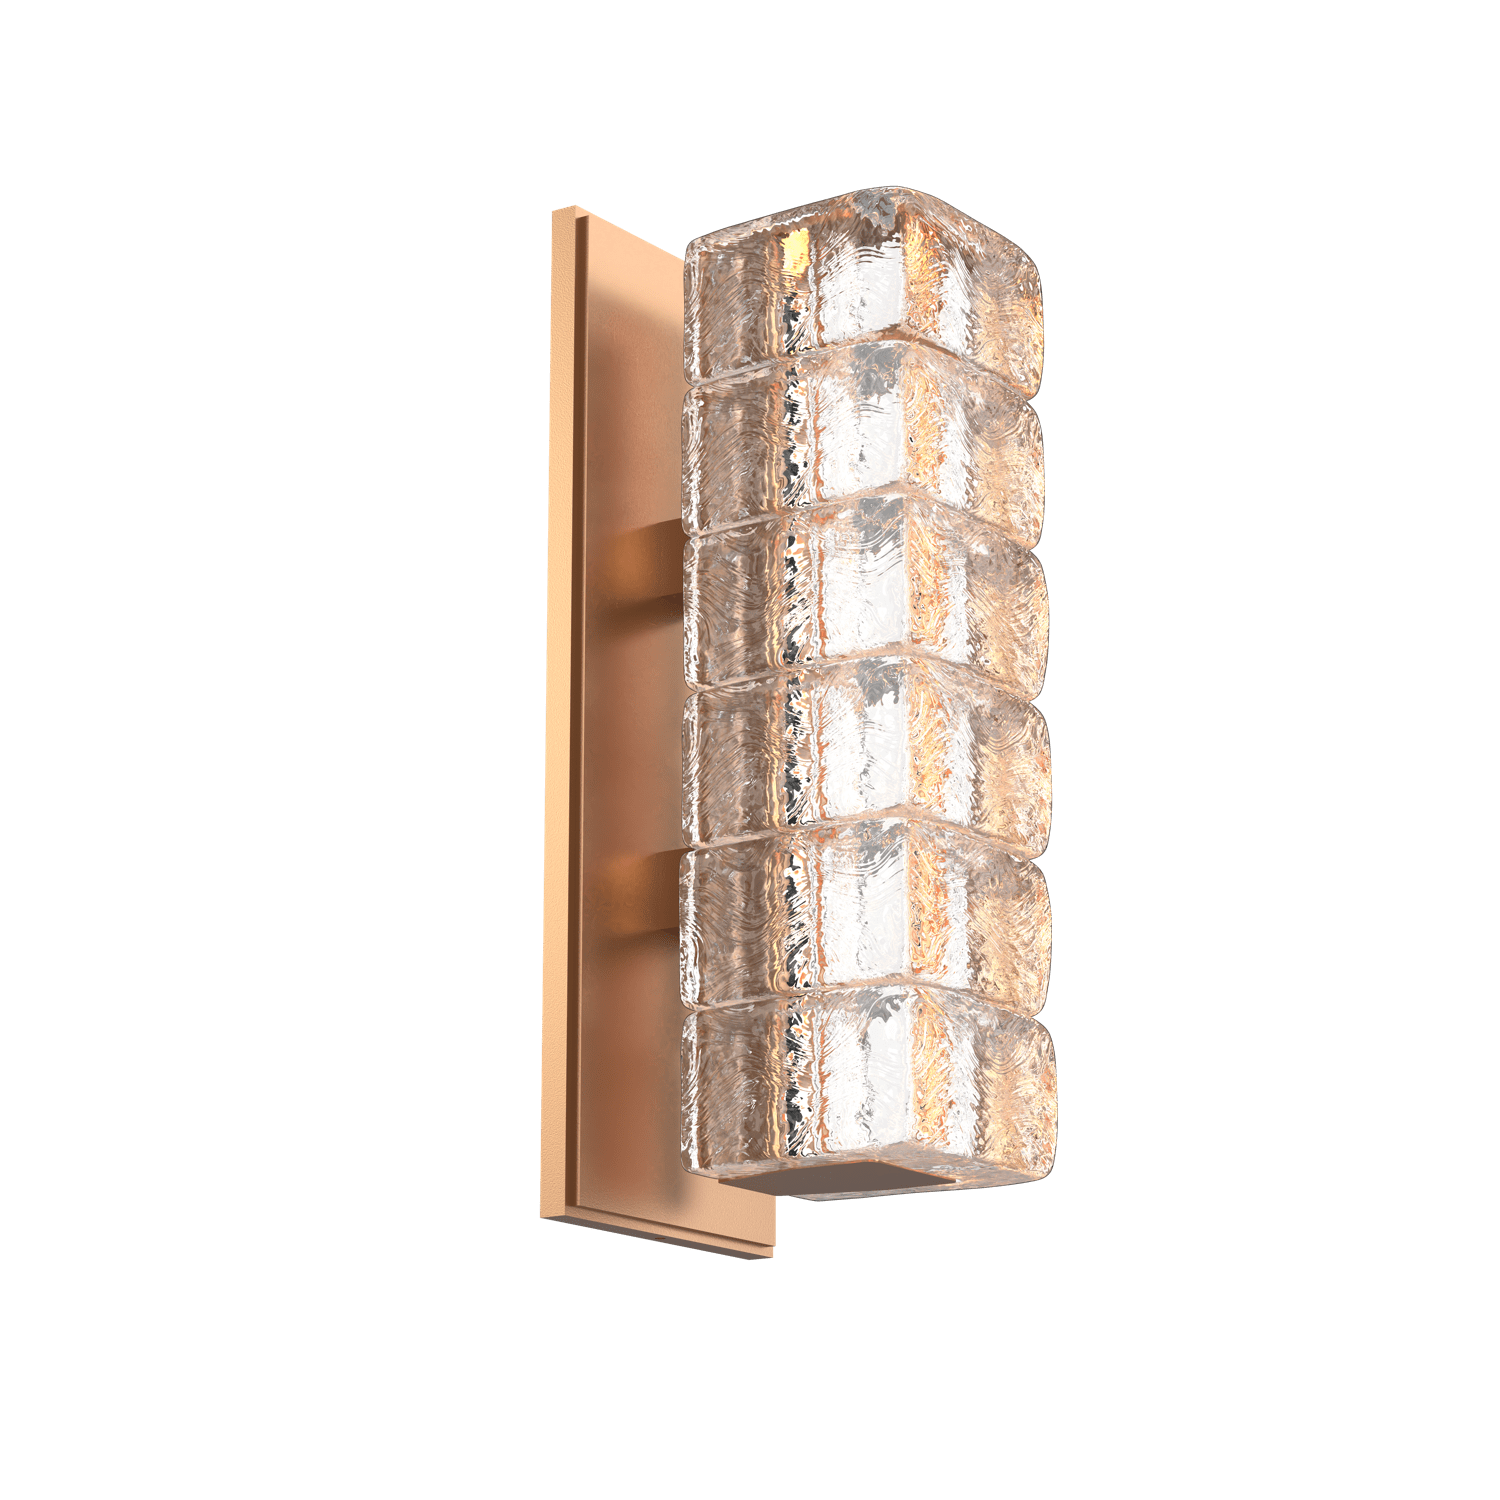 IDB0080-01-NB-Hammerton-Studio-Asscher-wall-sconce-with-novel-brass-finish-and-clear-cast-glass-shades-and-LED-lamping